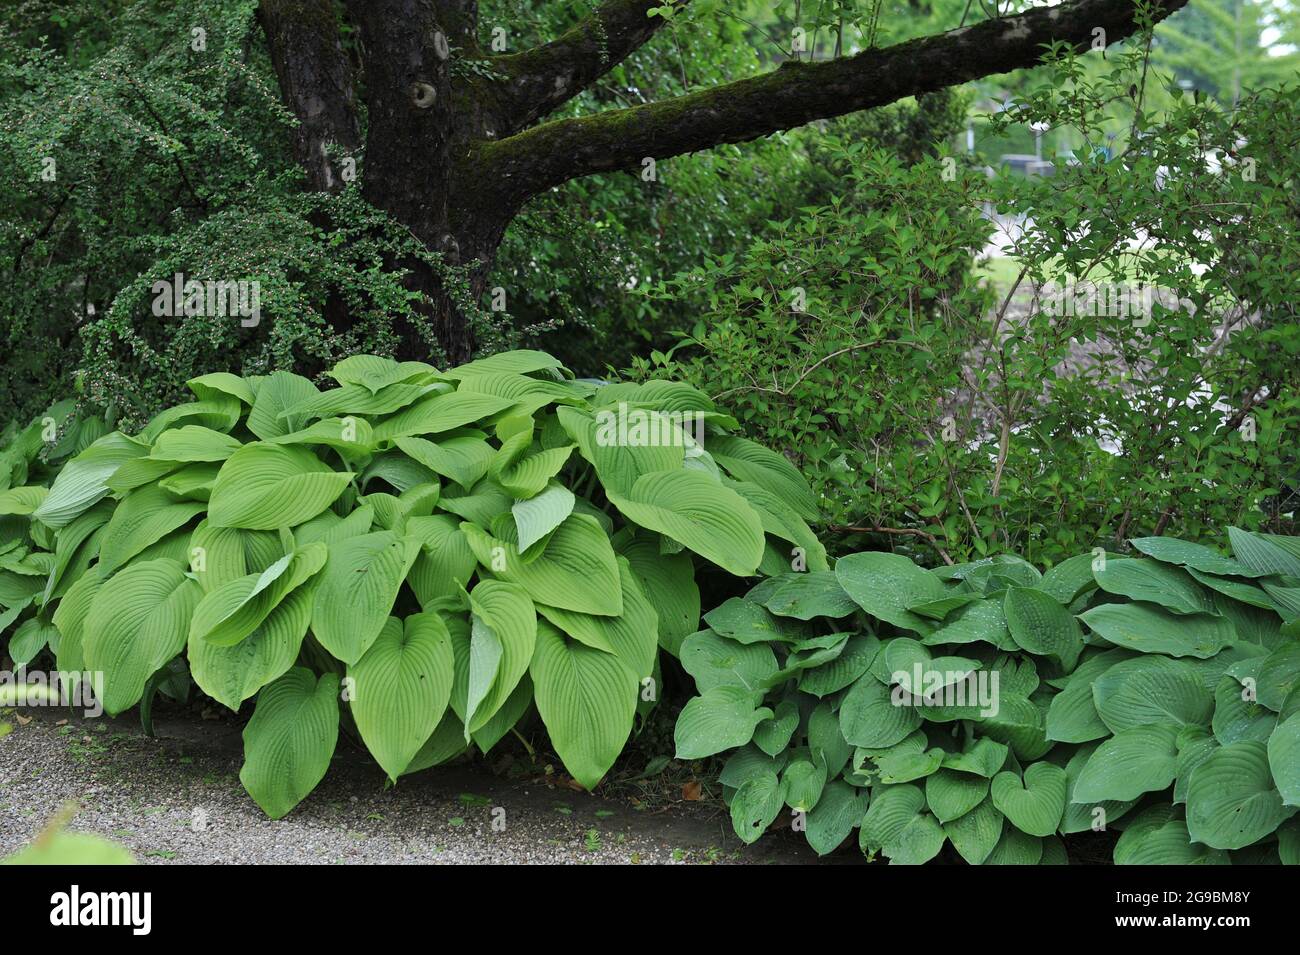 Giant Hosta Green Acres with large green leaves grows in a garden in June Stock Photo